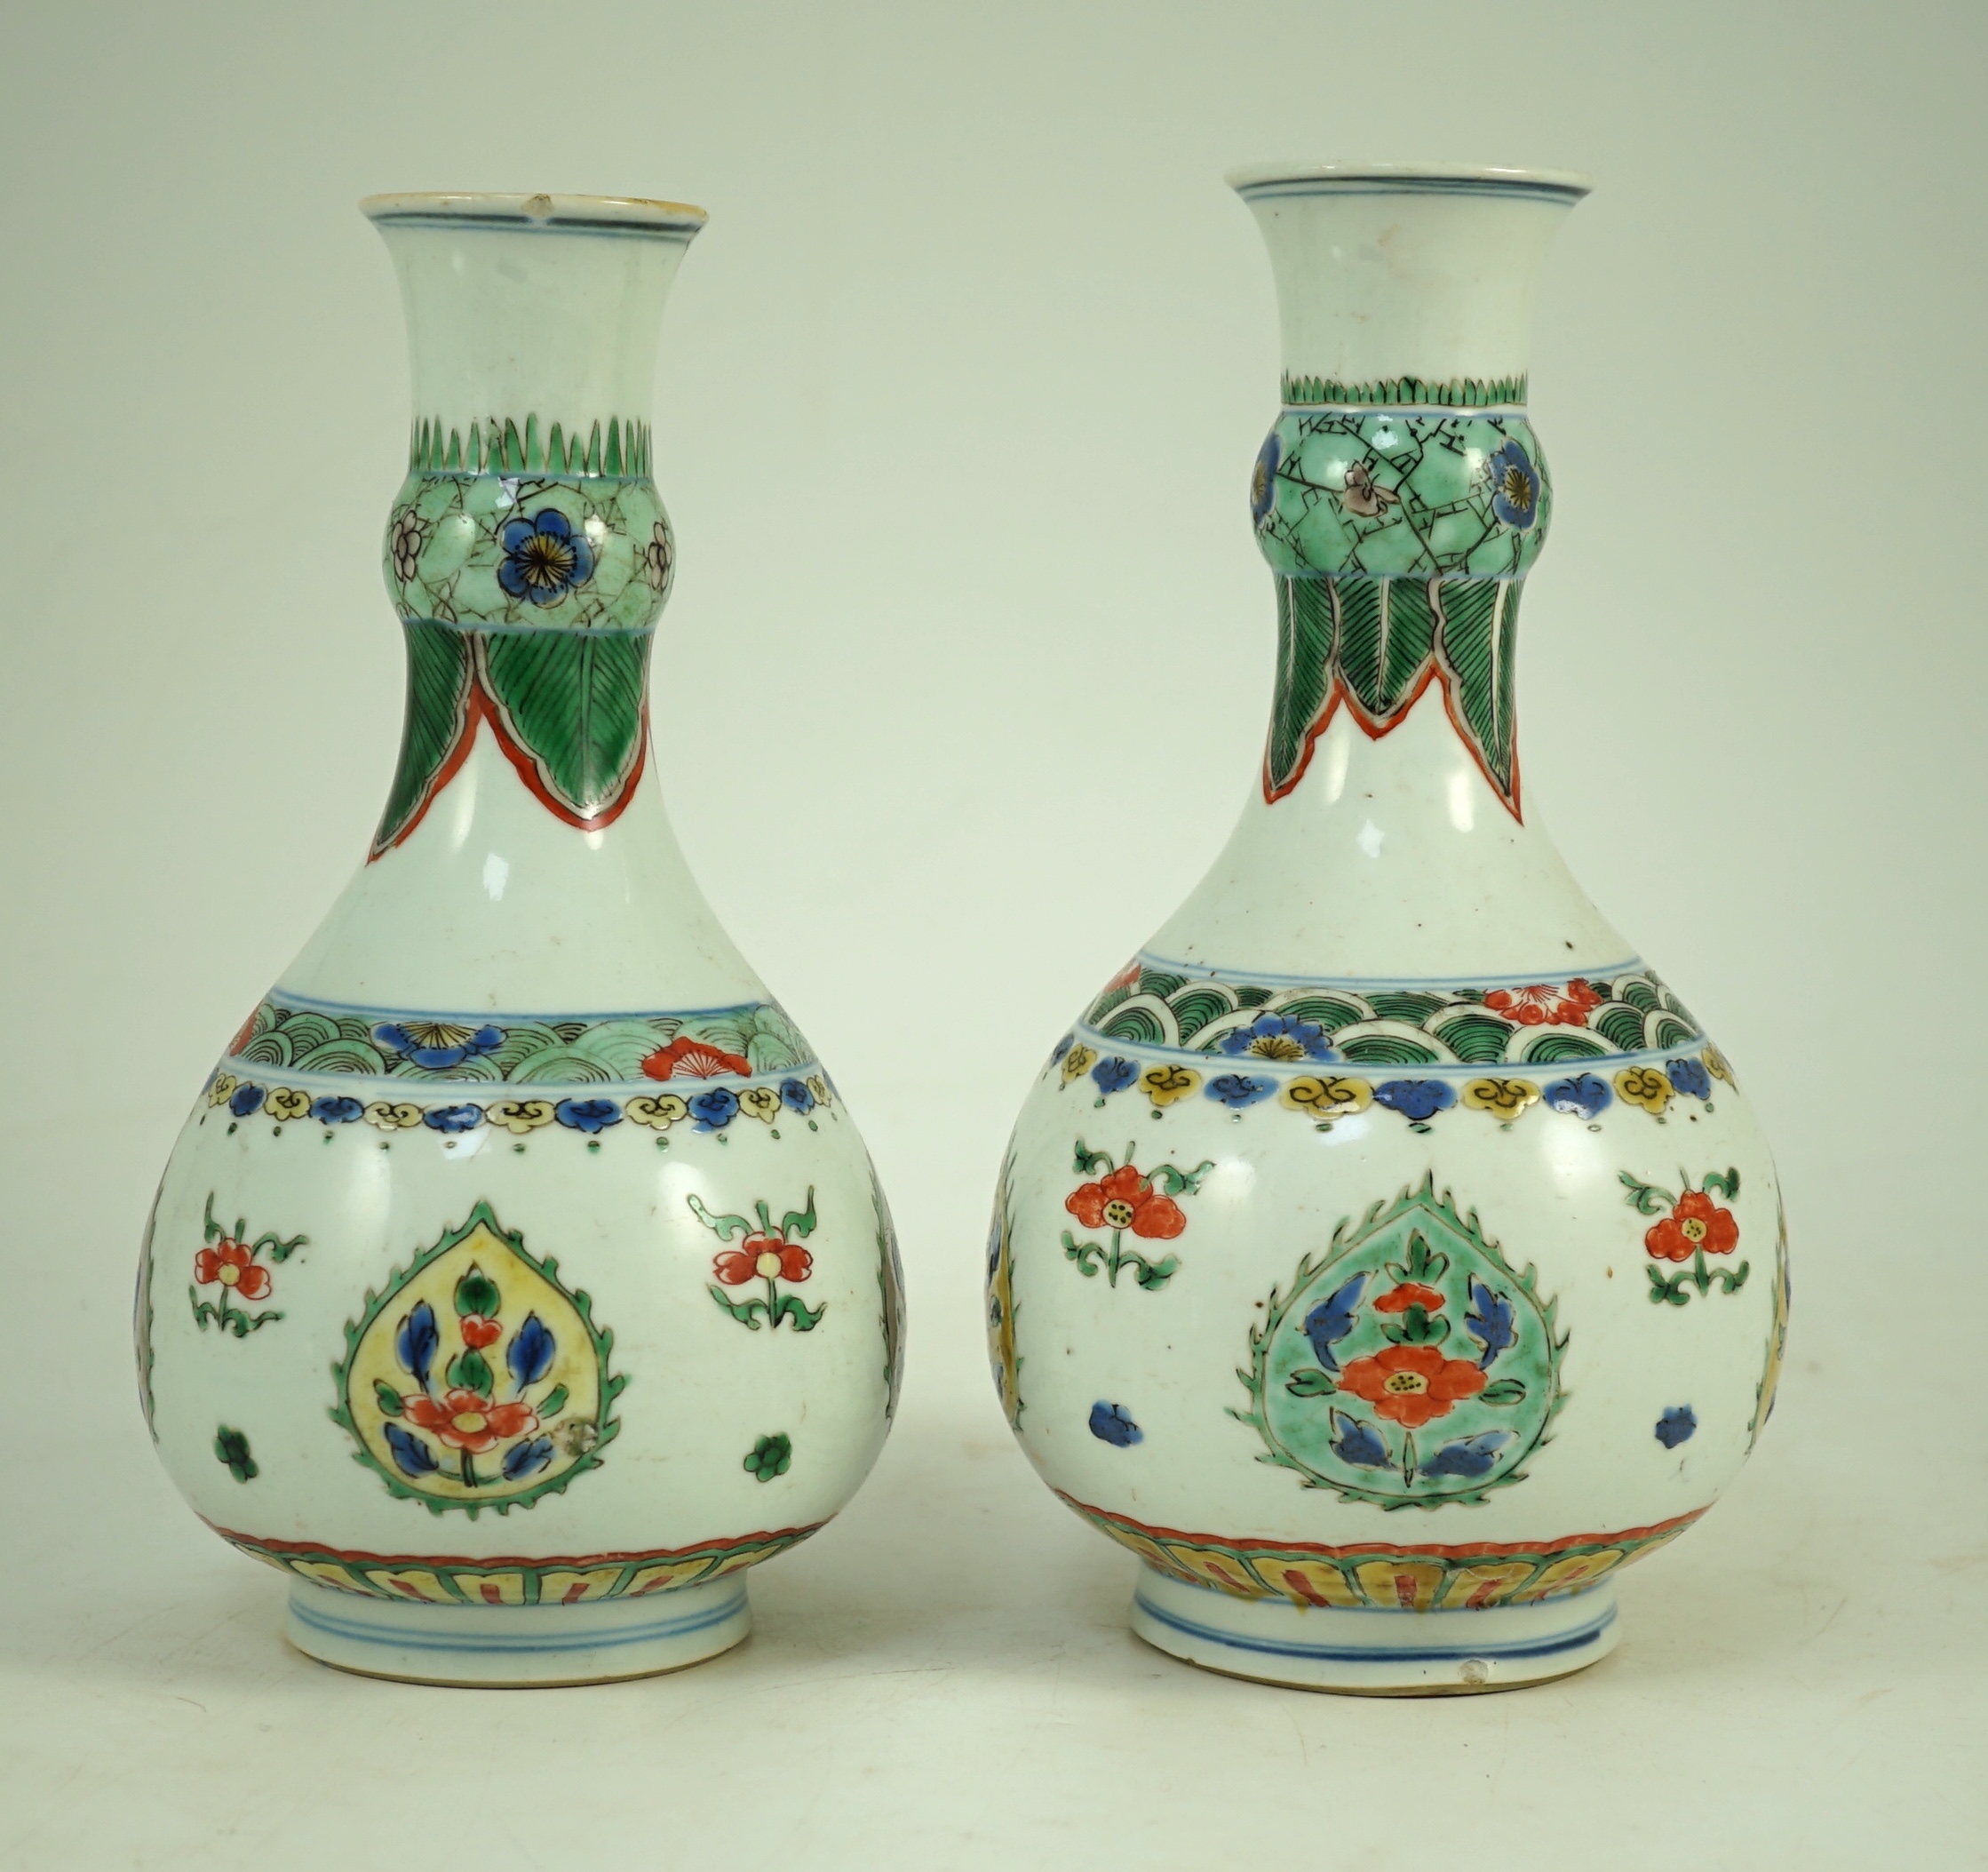 A near pair of Chinese famille verte garlic-neck vases, Kangxi period, 20cm and 20.5cm high, One vase restored